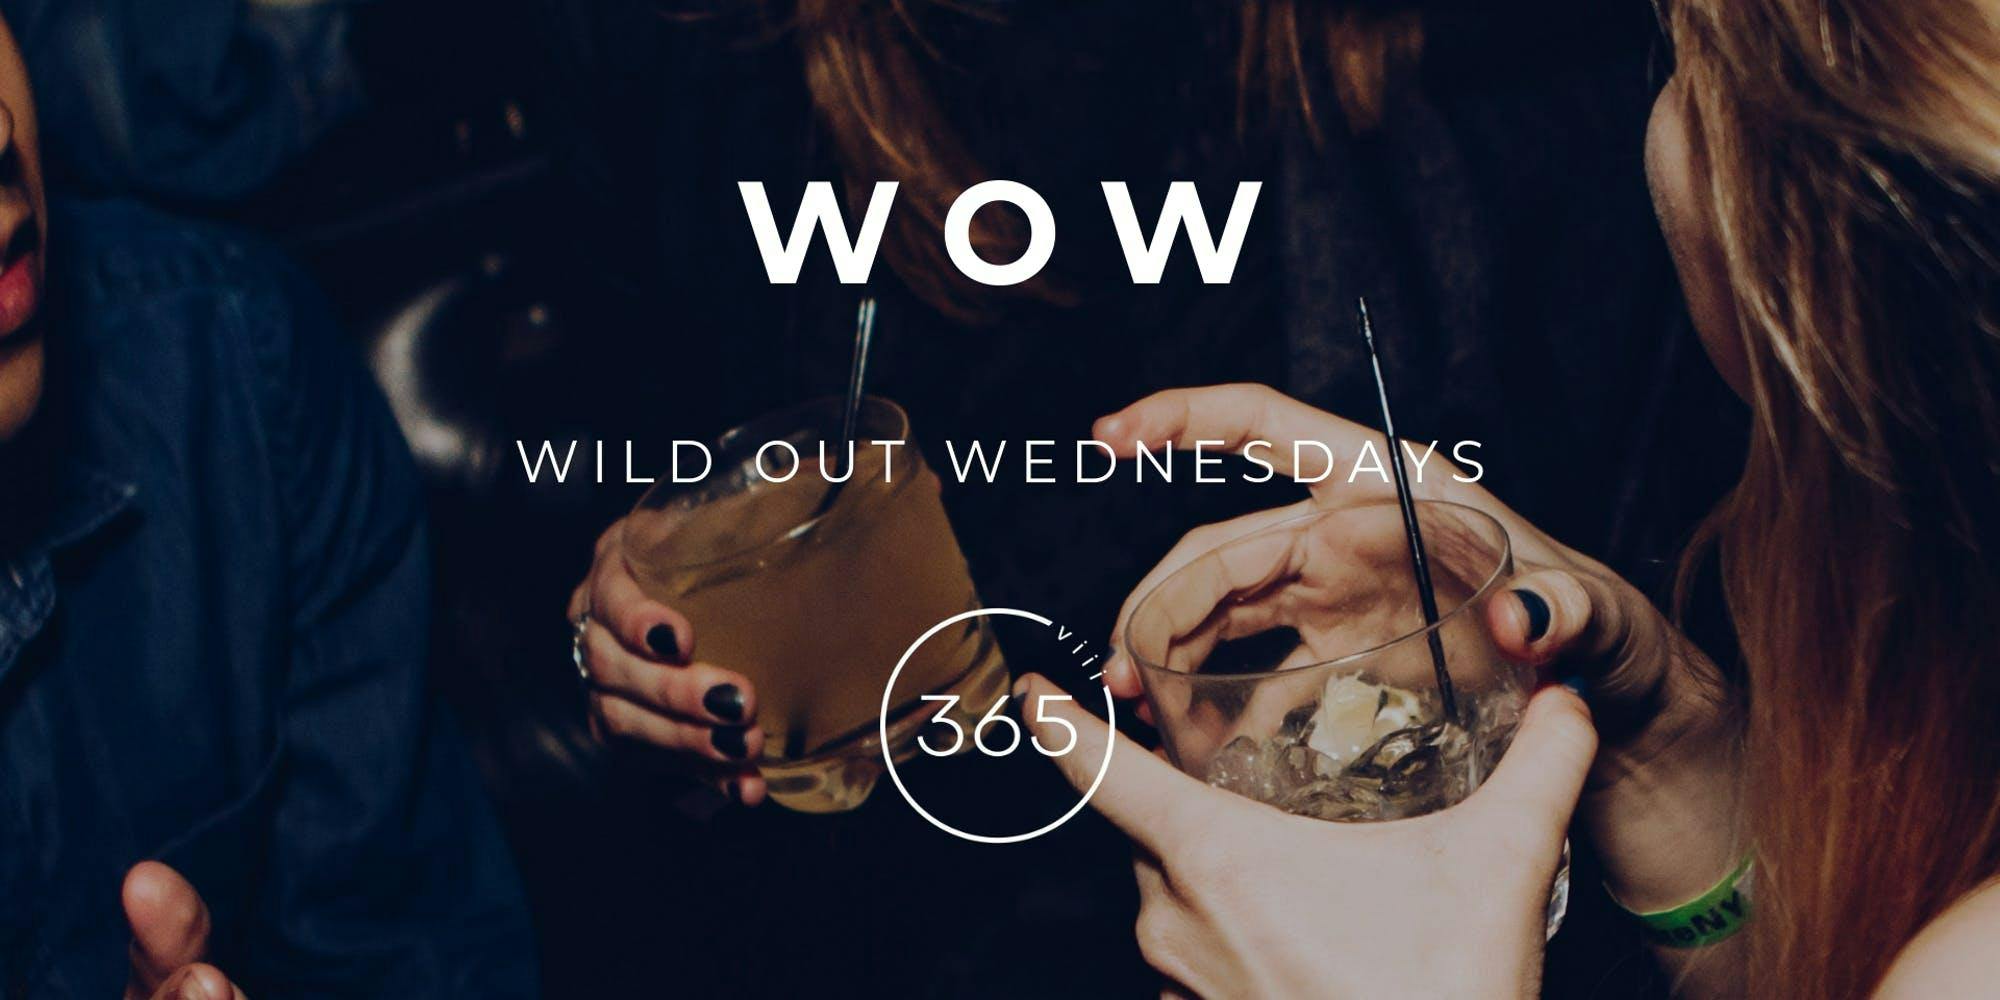 Wild Out Wednesdays at 365-viii